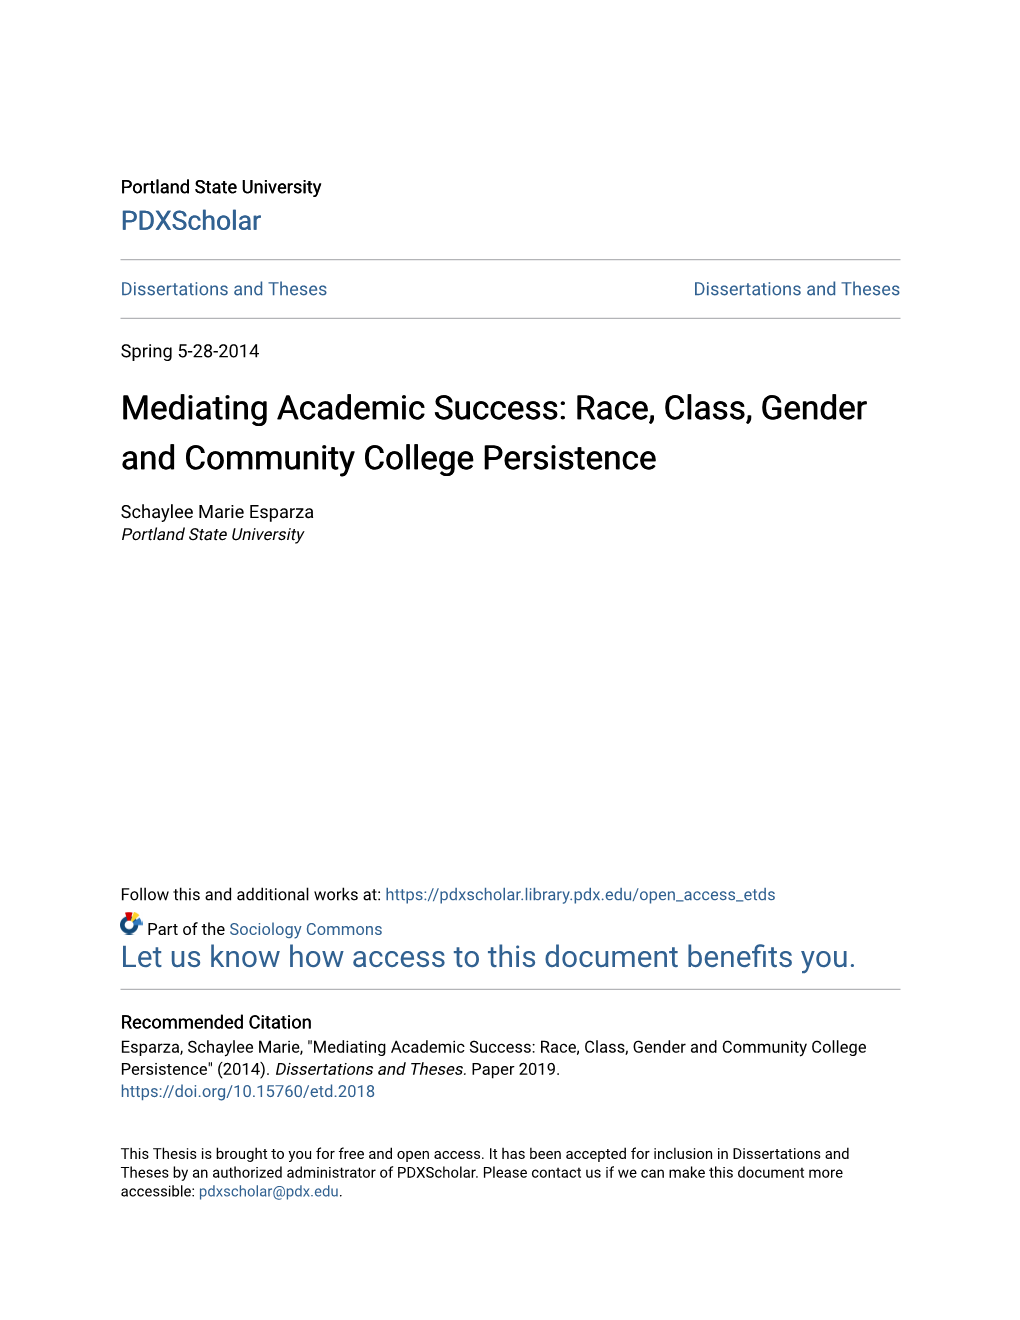 Race, Class, Gender and Community College Persistence